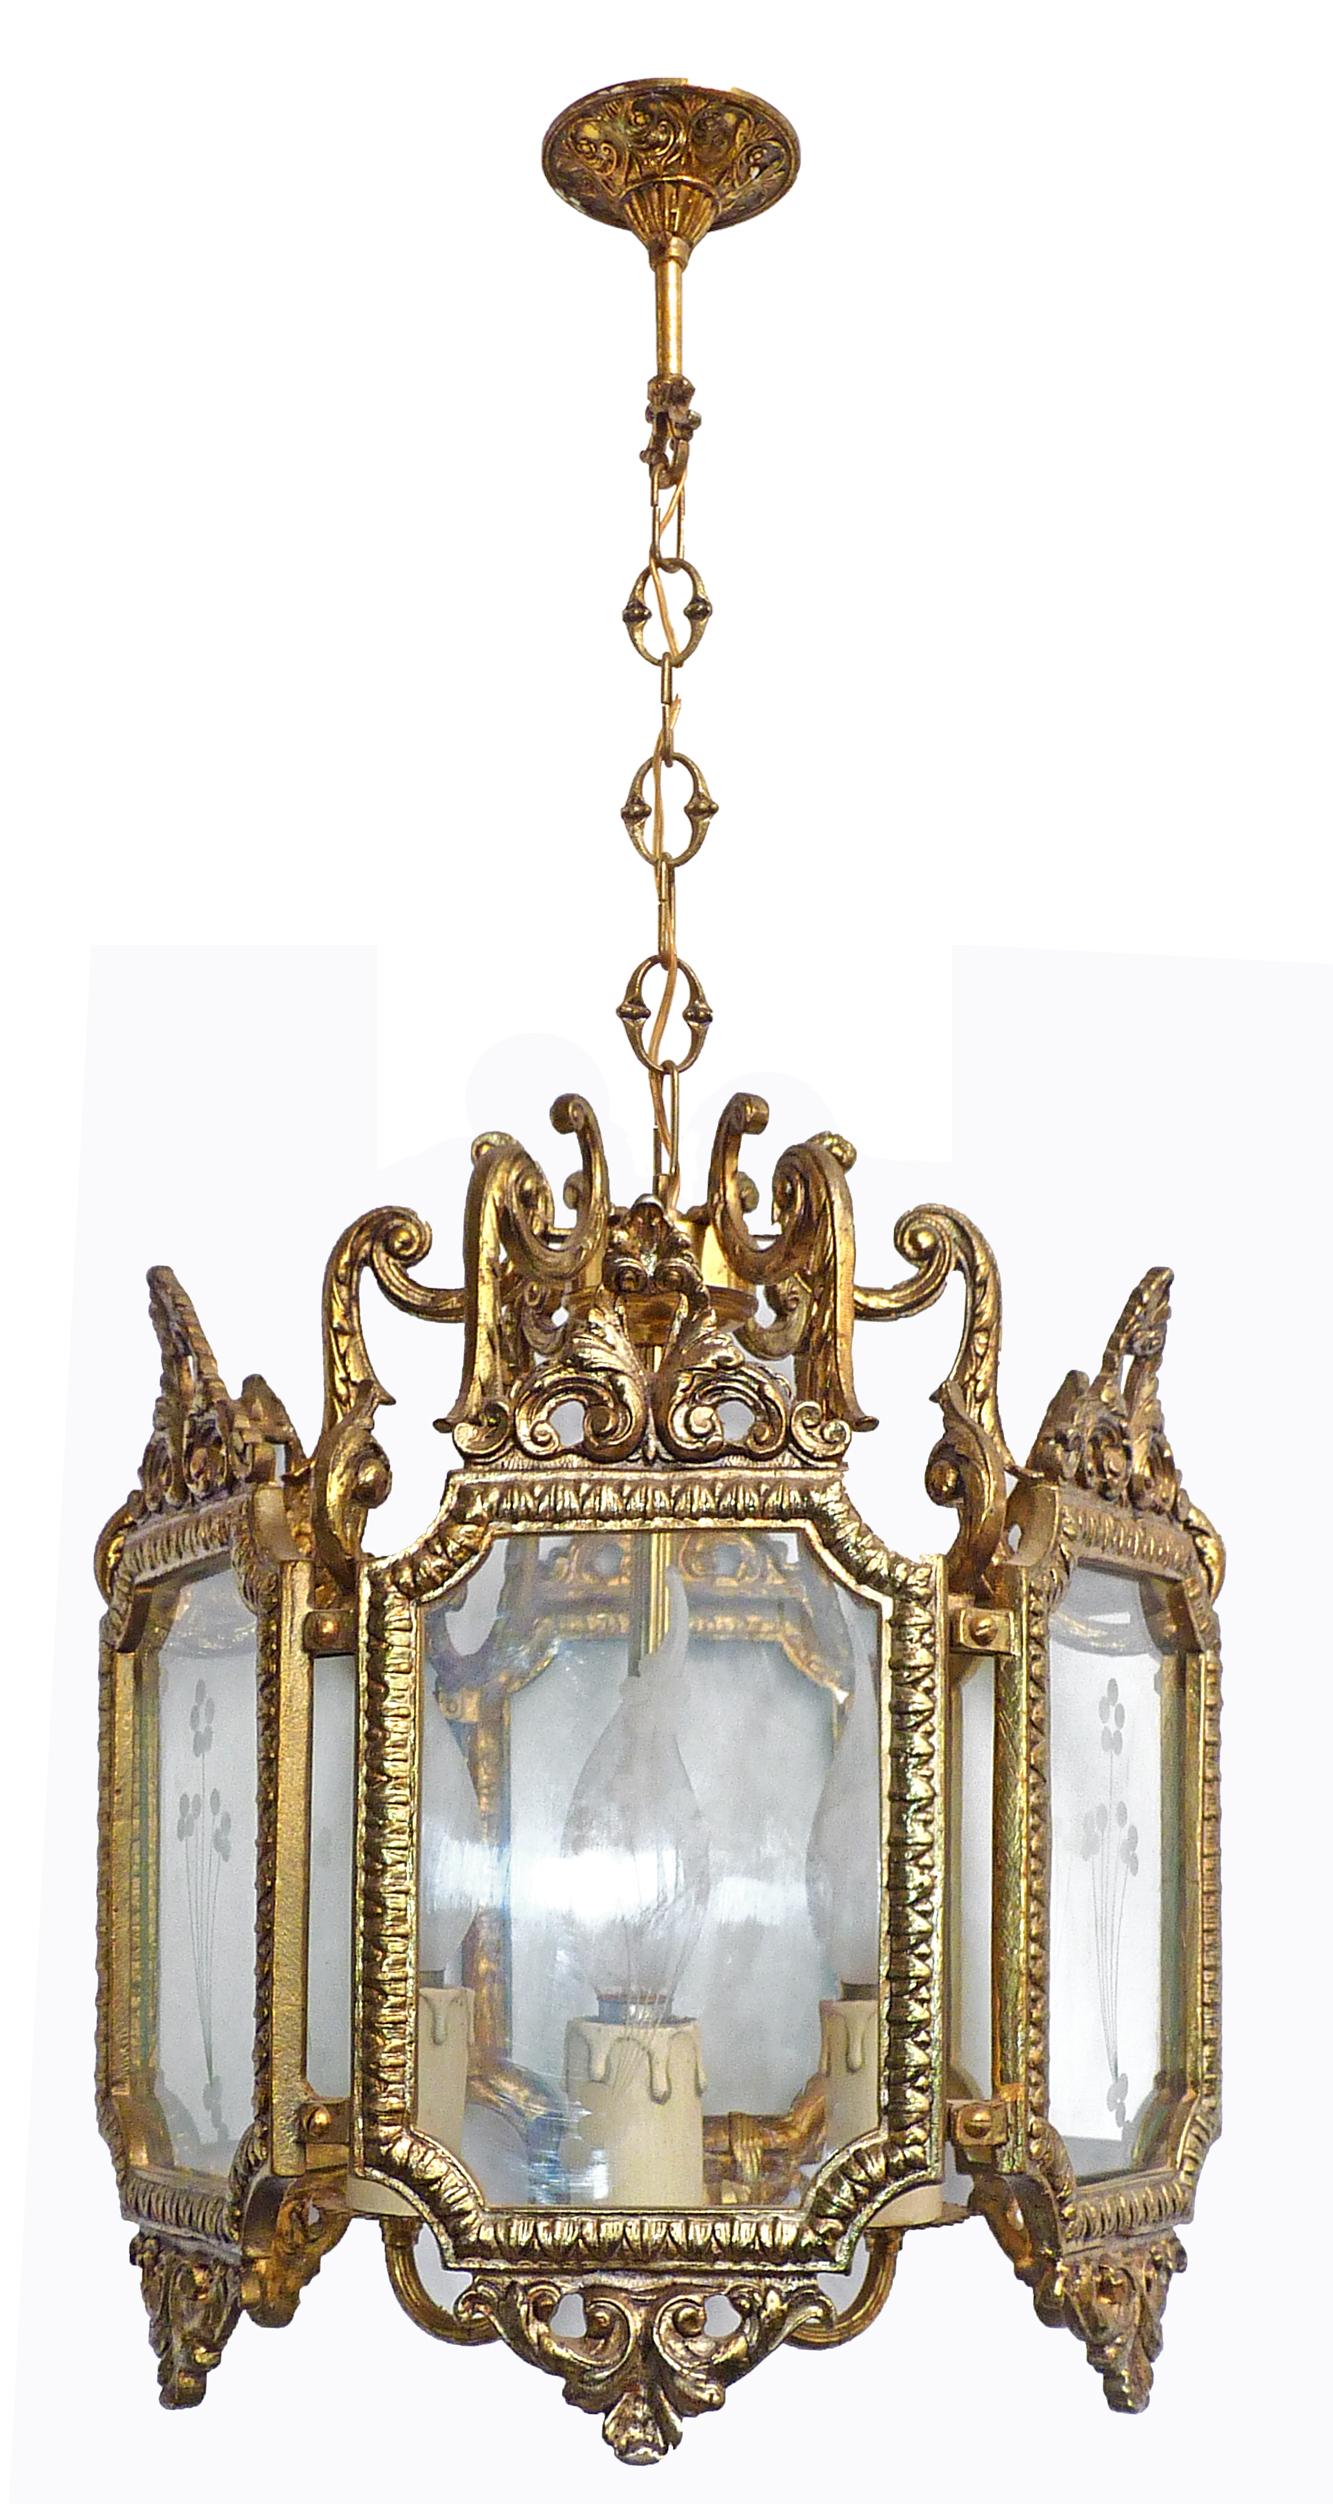 20th Century French Hexagonal Empire Gilt Bronze & Etched Glass 3-Light Lantern or Chandelier For Sale